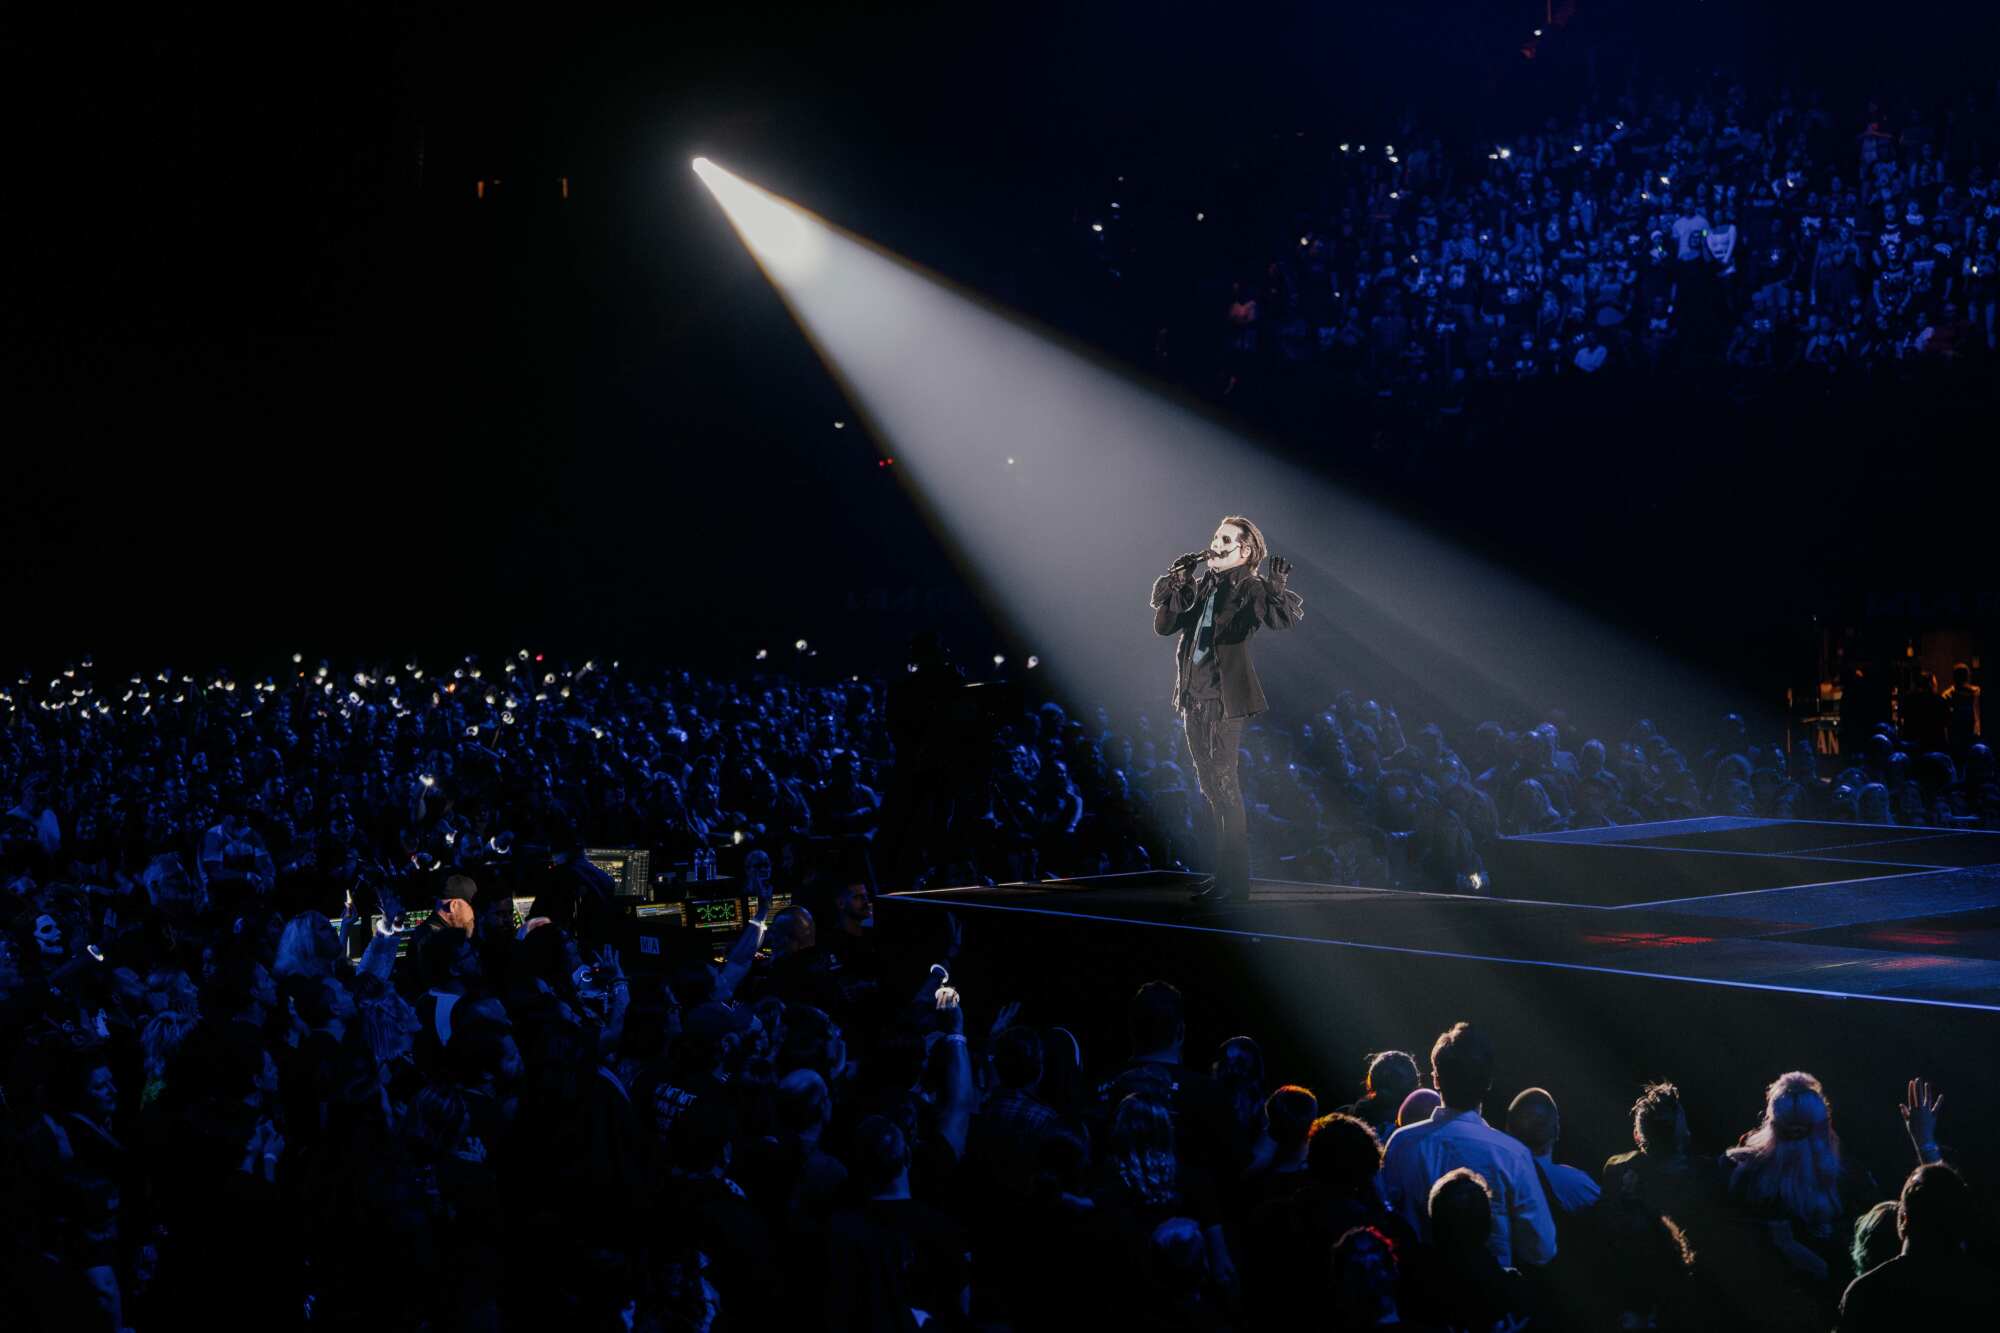 A singer in a spotlight performs in front of a large crowd.